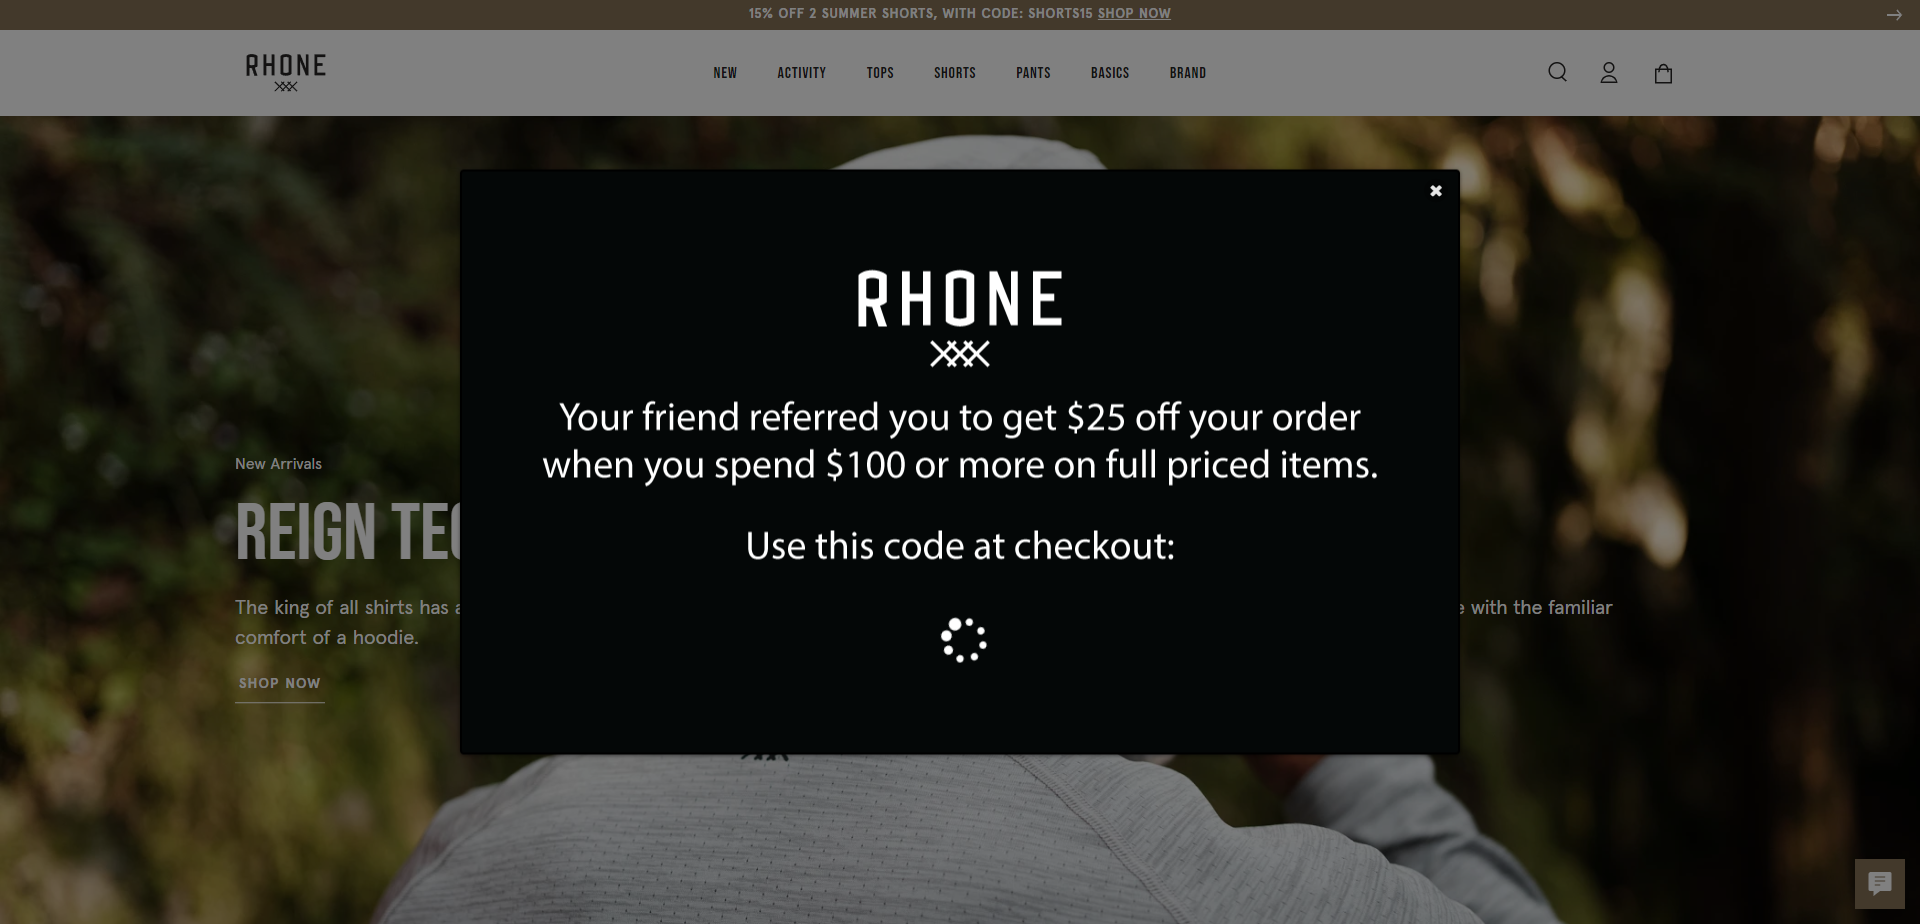 Landing Page for Rhone